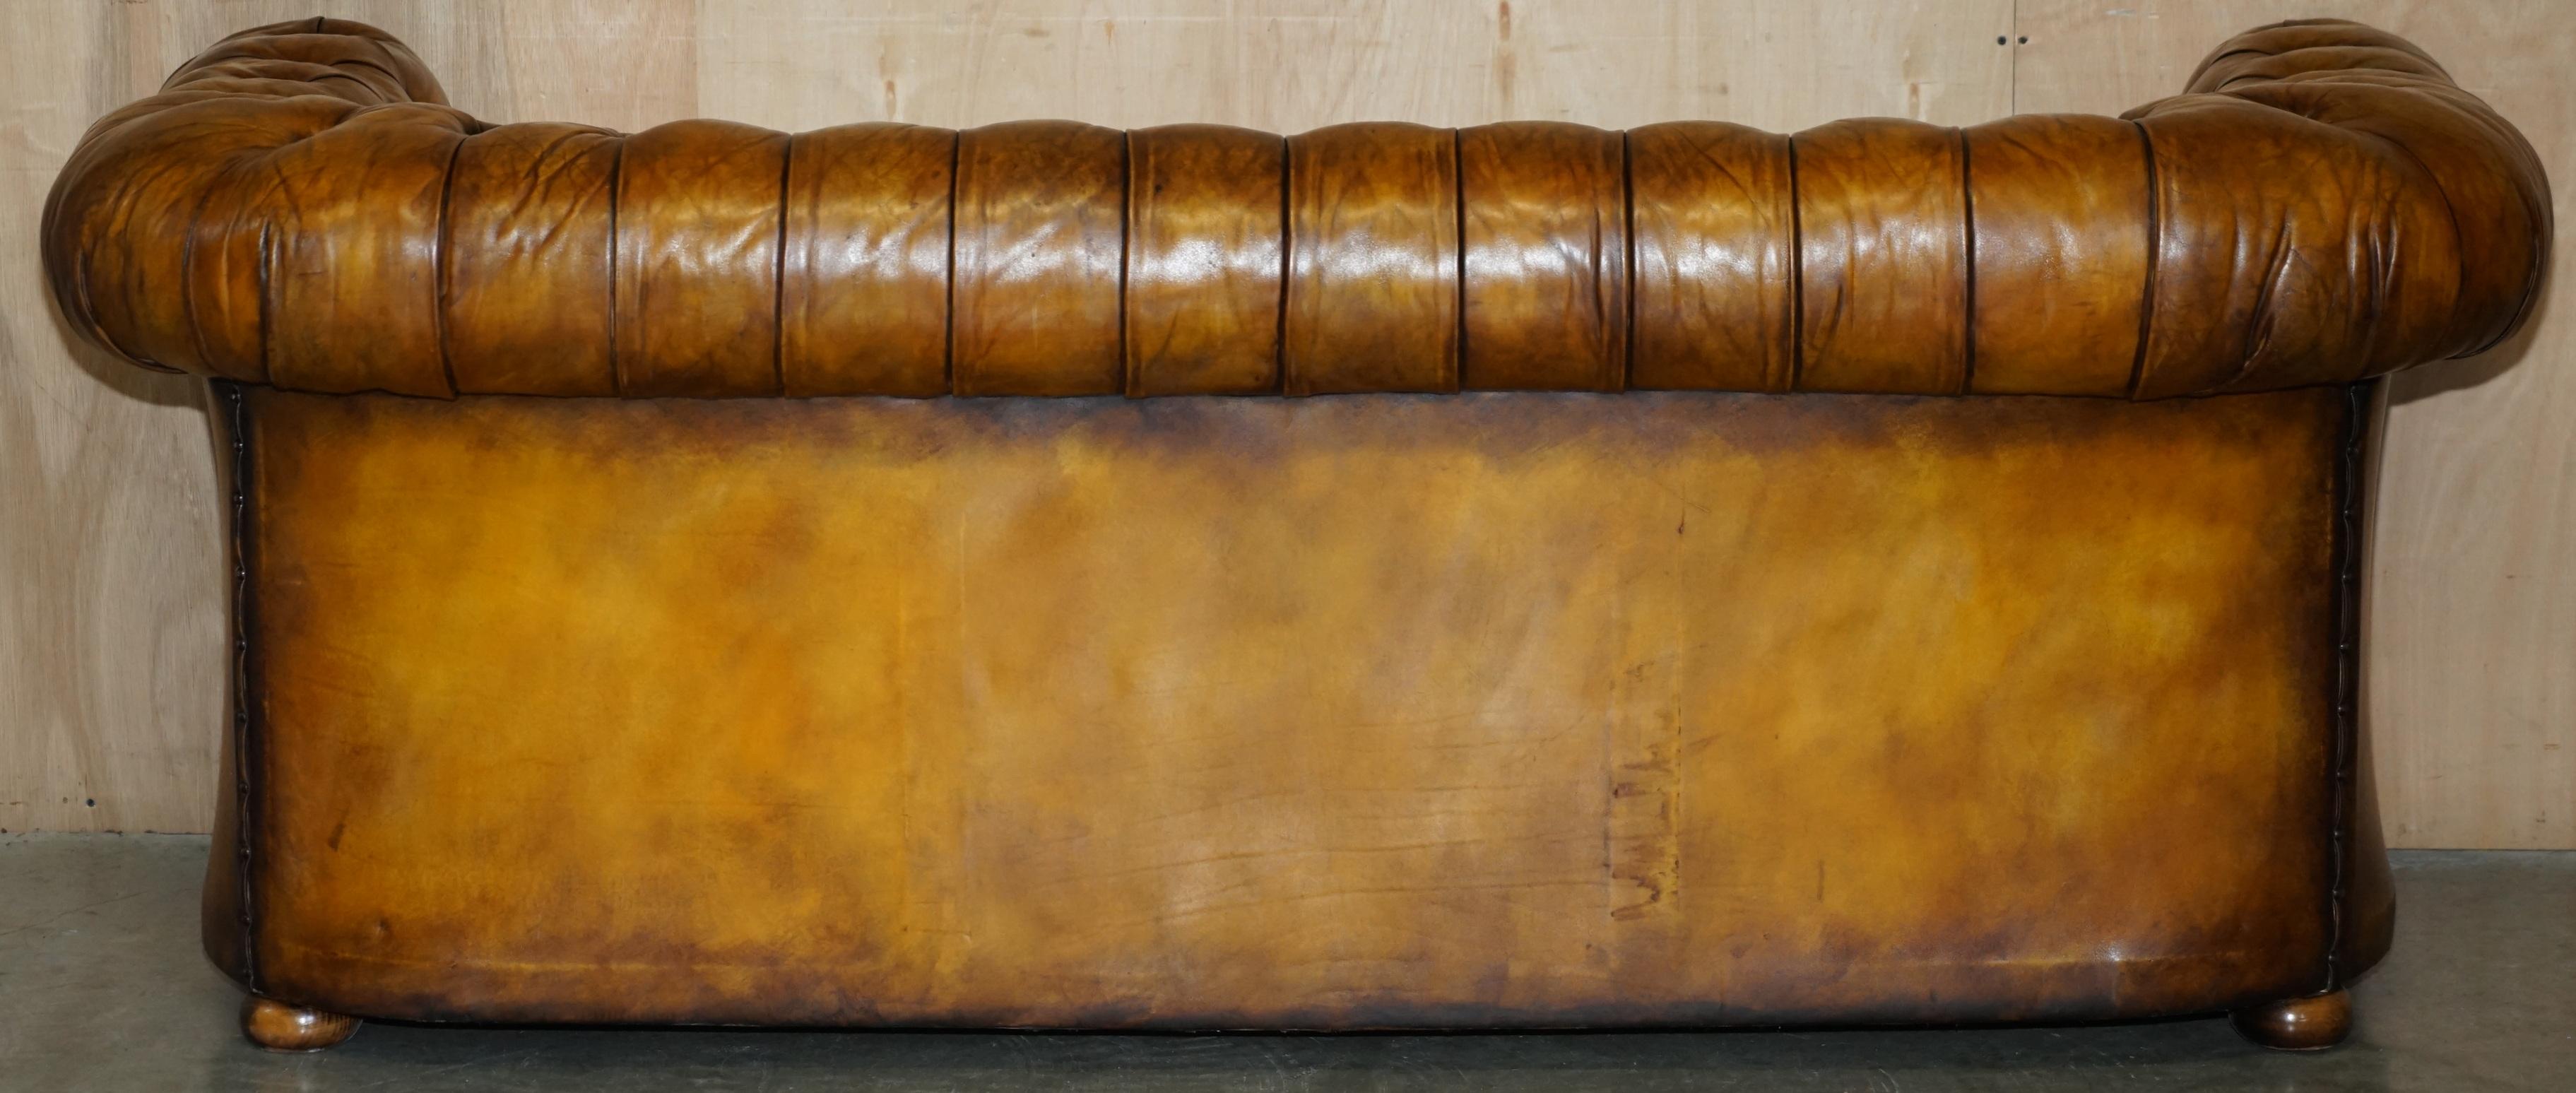 SUPER RARE FULLY RESTORED ViNTAGE CIGAR BROWN LEATHER CHESTERFIELD SOFA PART SET For Sale 12